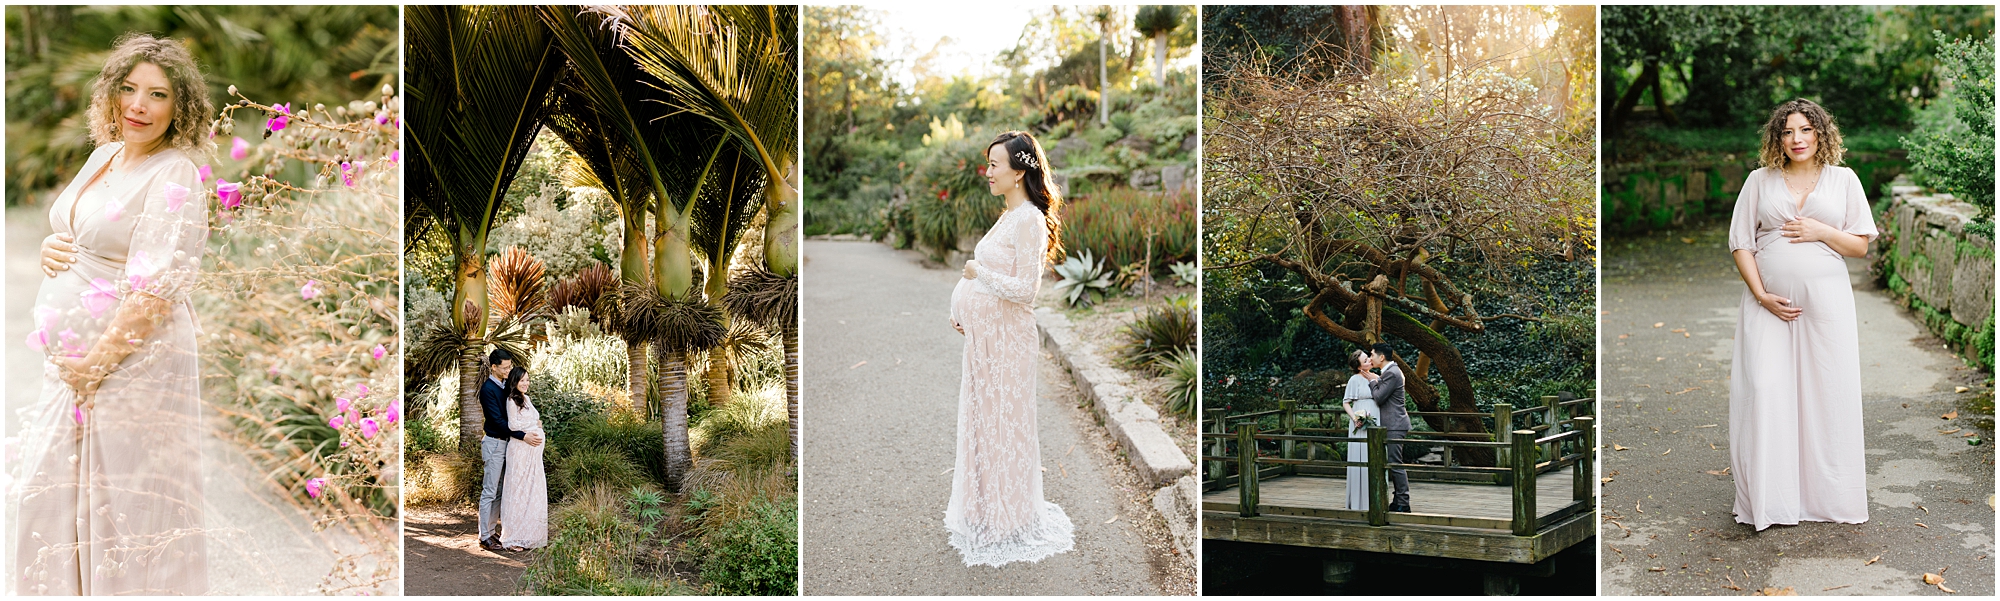  Best San Francisco Photoshoot and photography locations Bay Area Photography locations Botanical Gardens